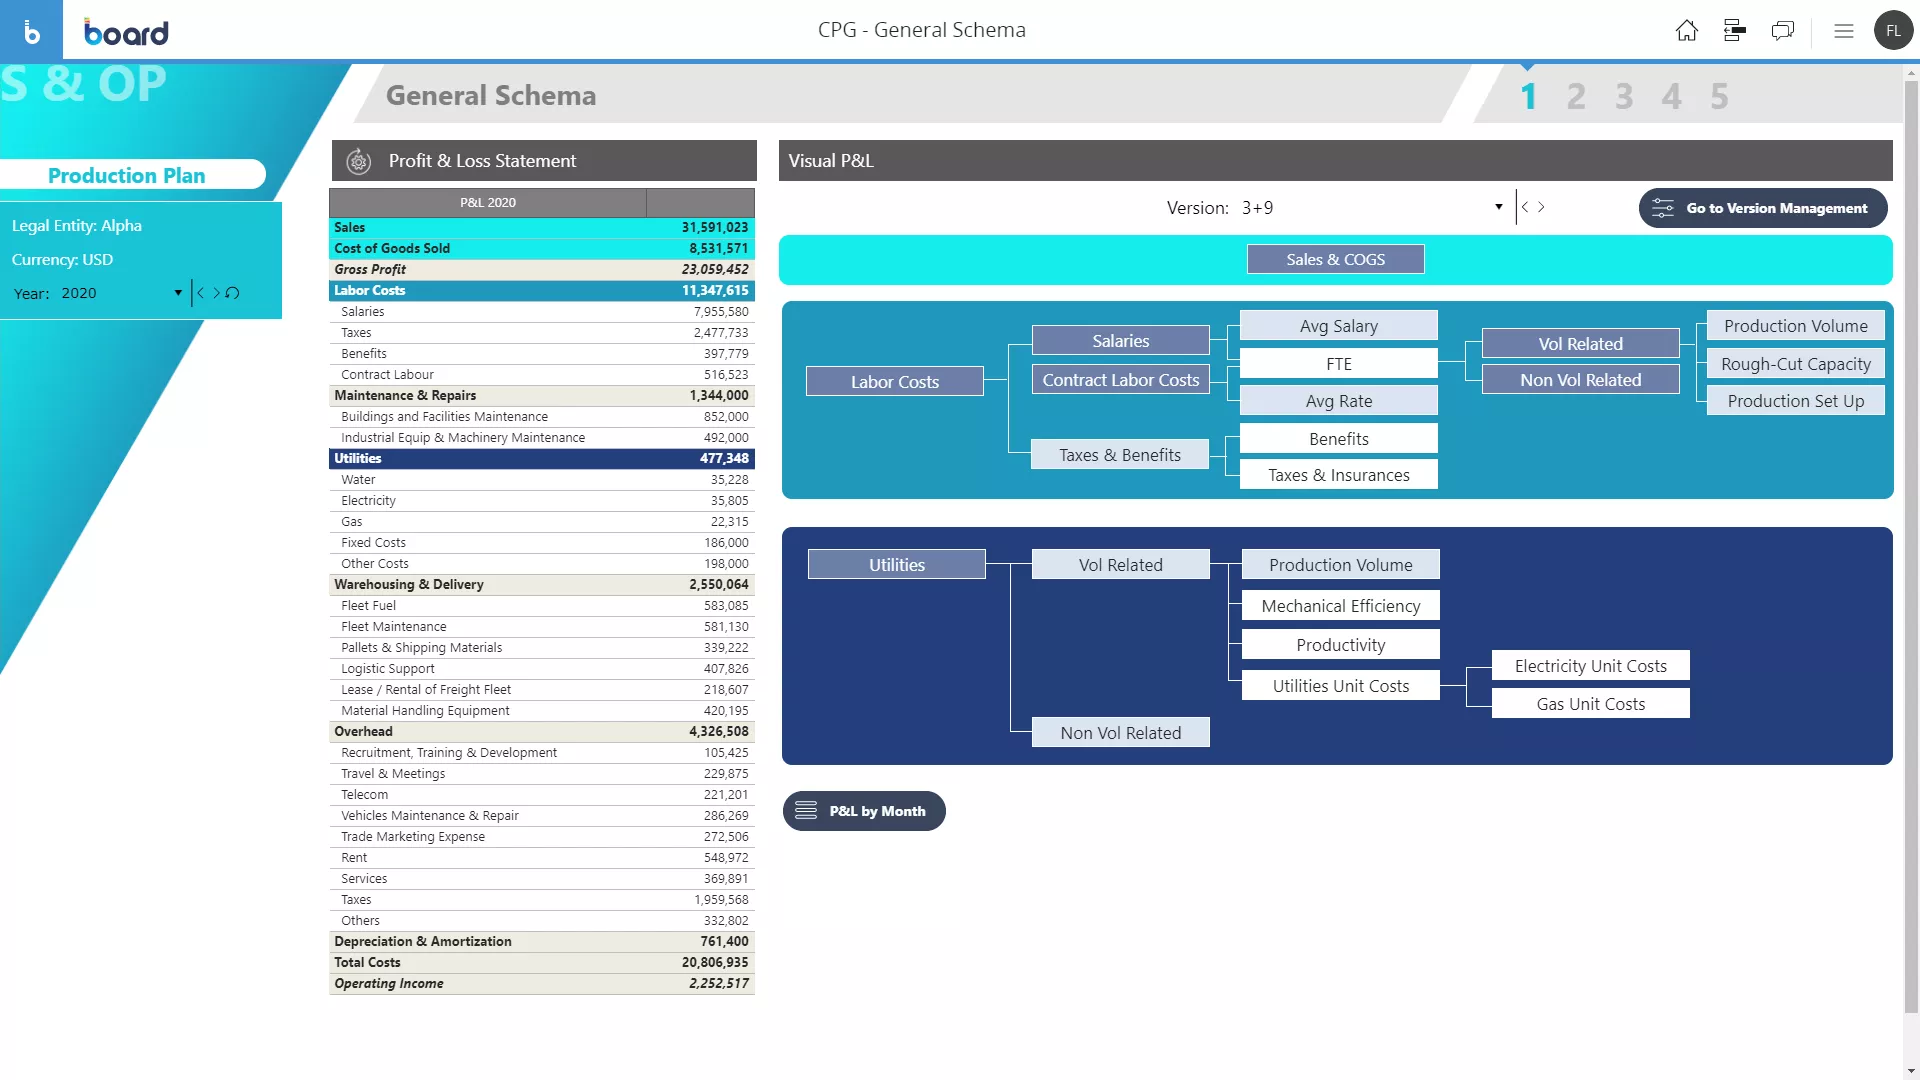 Unified CPG Planning and Analytics Software Image 6